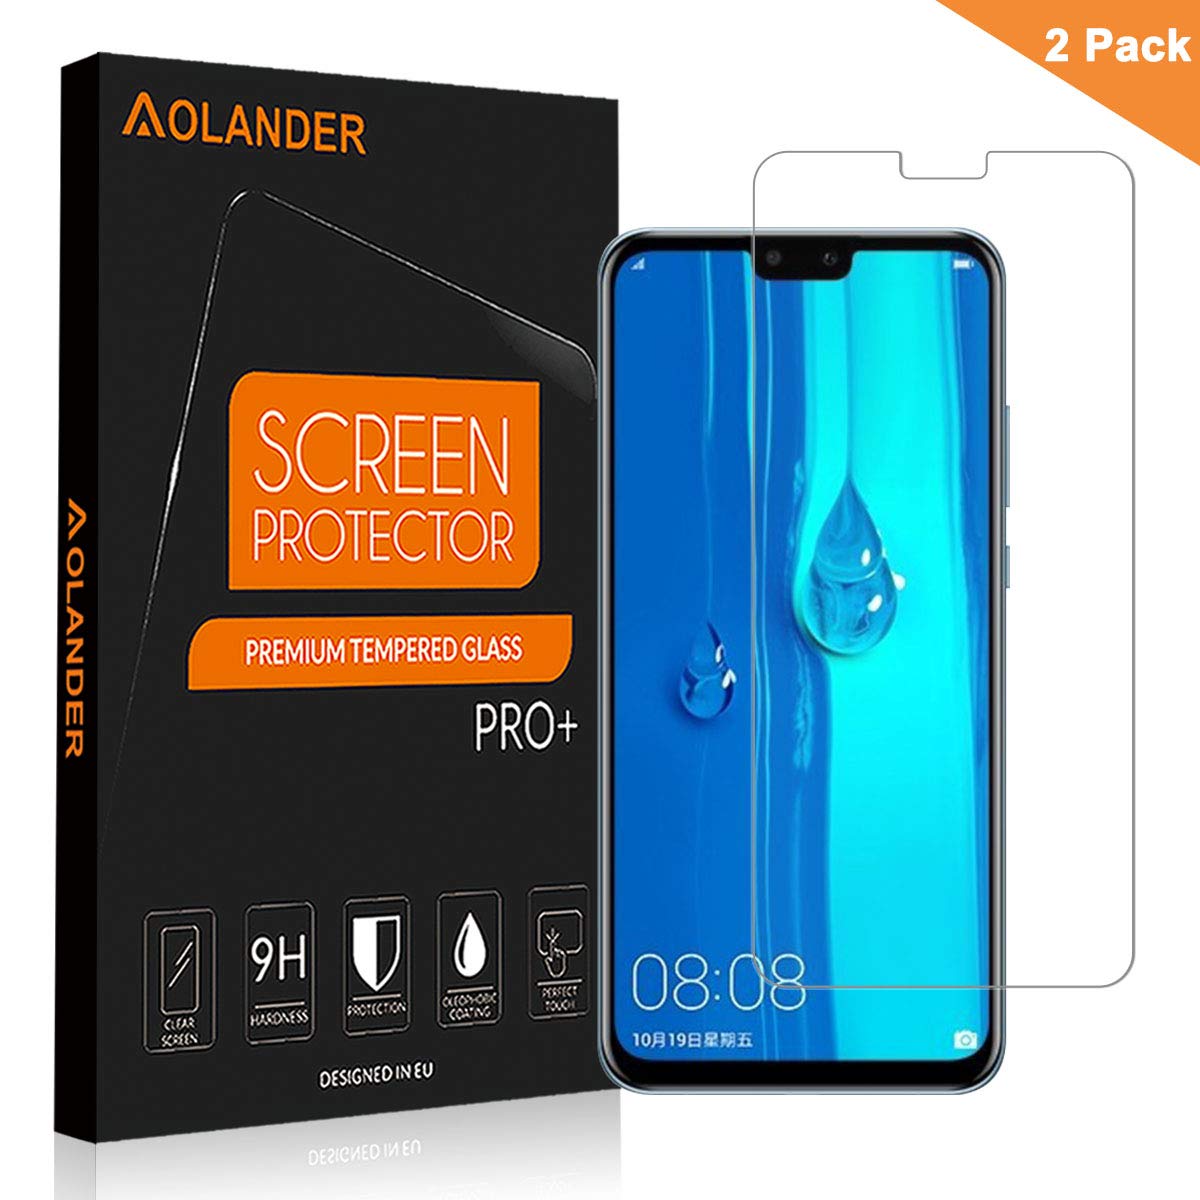 Easy Installation Bubble Free Bear Village Huawei Y9 2019 Tempered Glass Screen Protector 2 Pack 99% Clarity Screen Protector Film for Huawei Y9 2019 